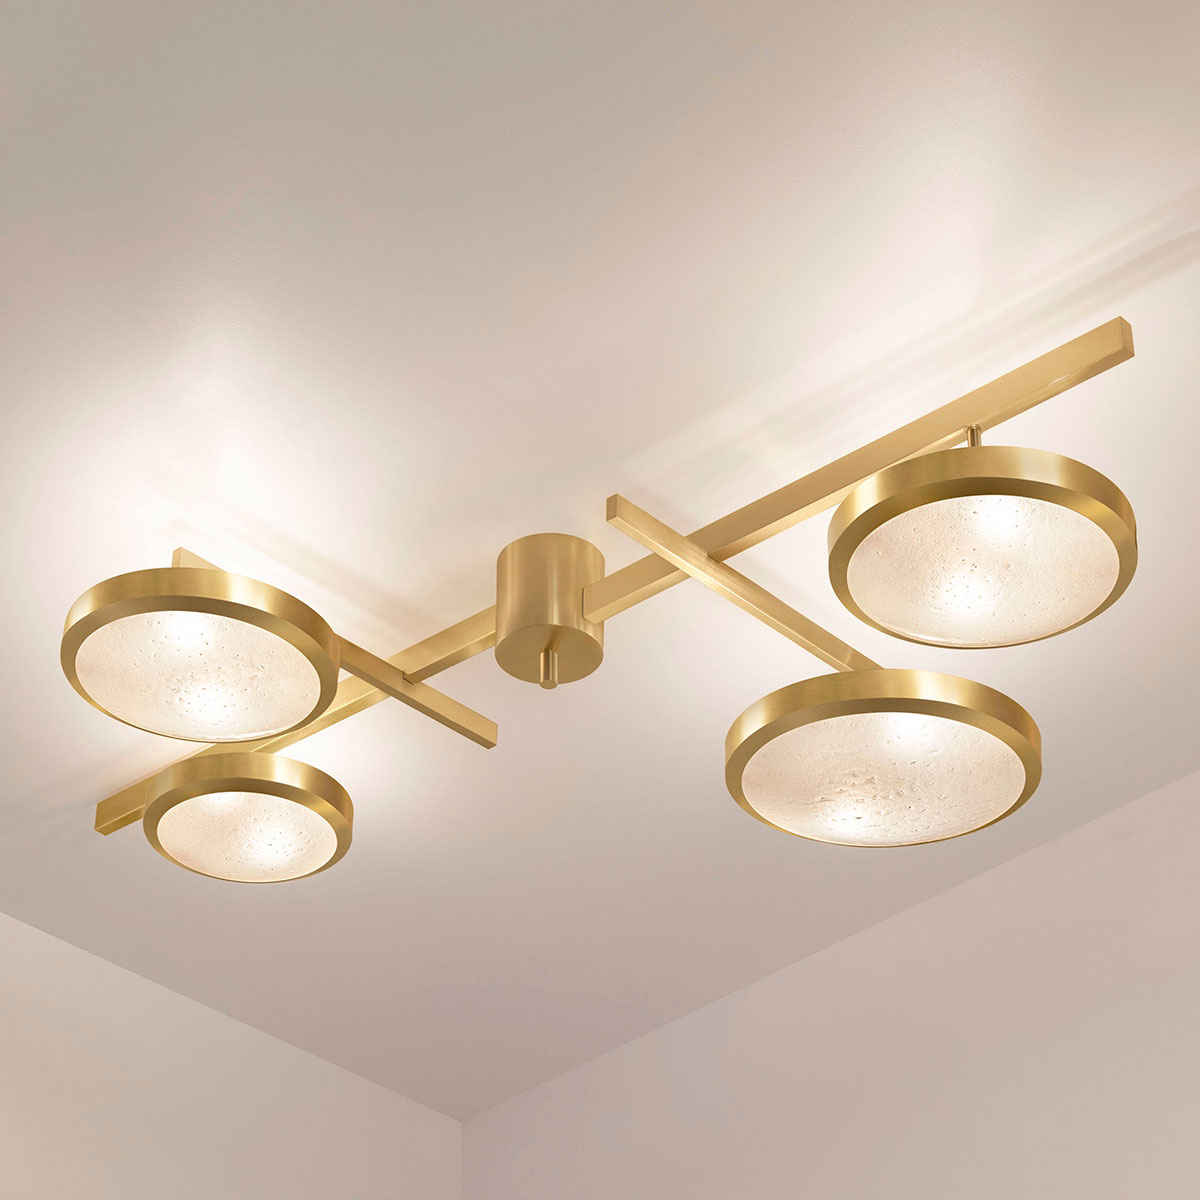 Tetrix ceiling light with satin brass finish by Gaspare Asaro